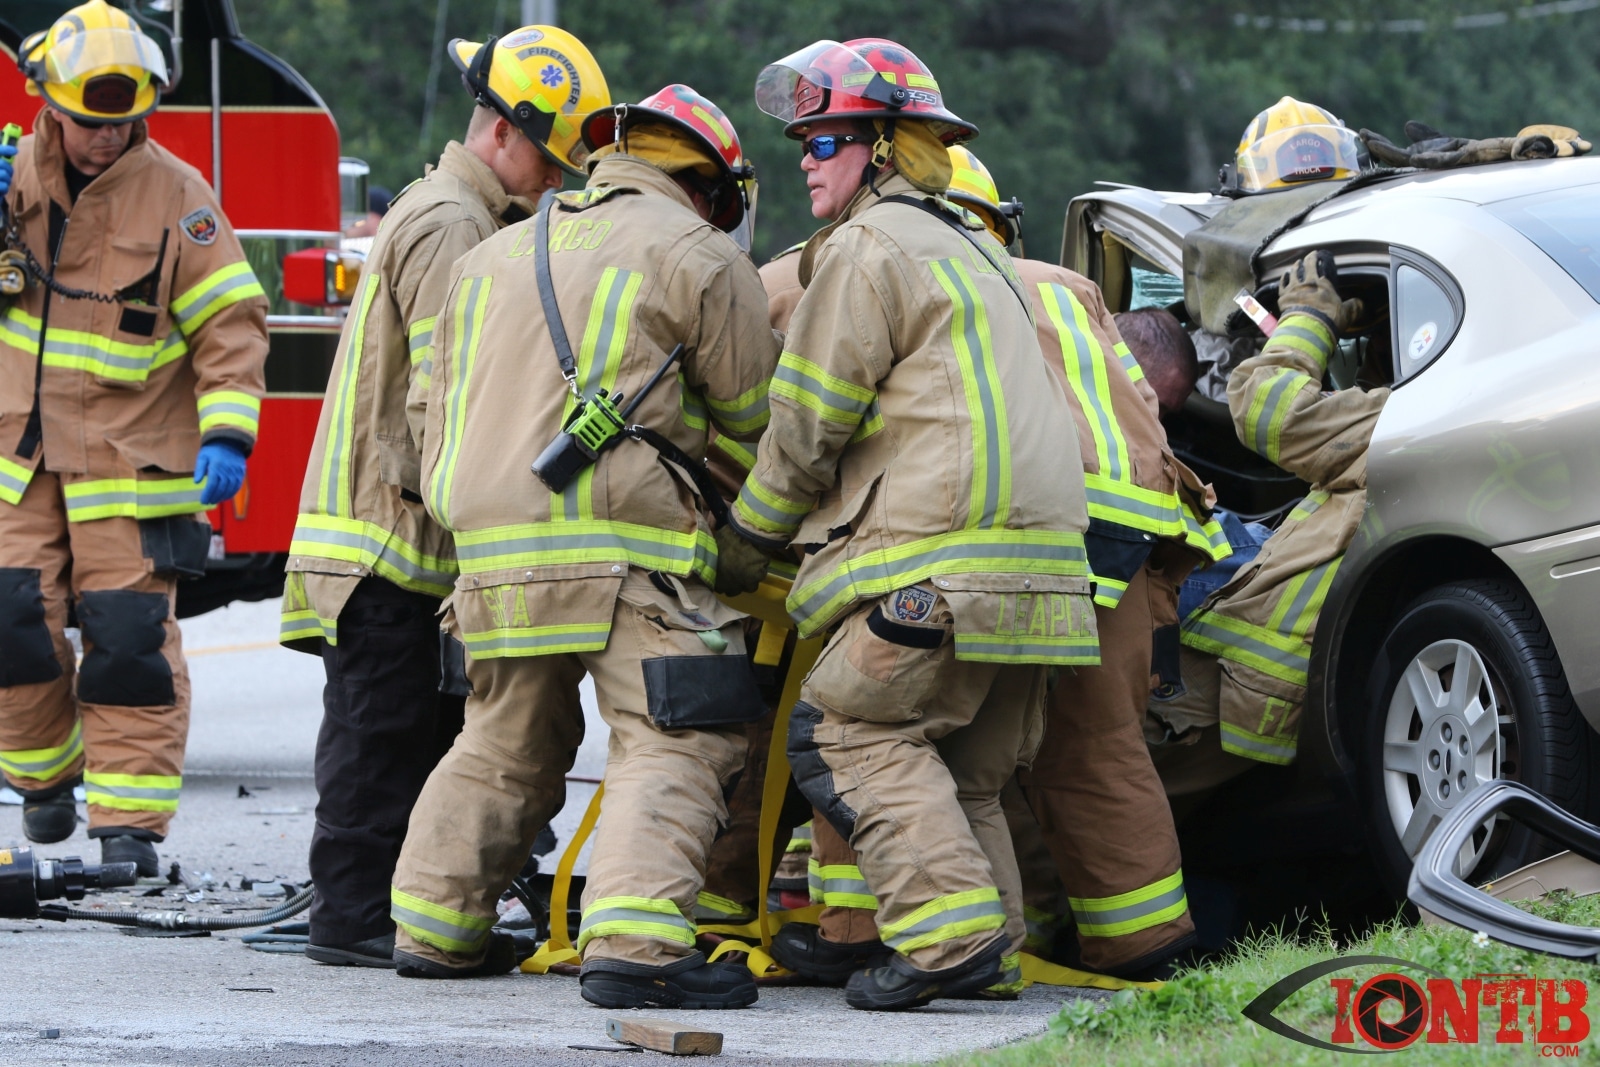 Three Hospitalized and Driver Flees Following Extrication Crash On Keene Road In Largo